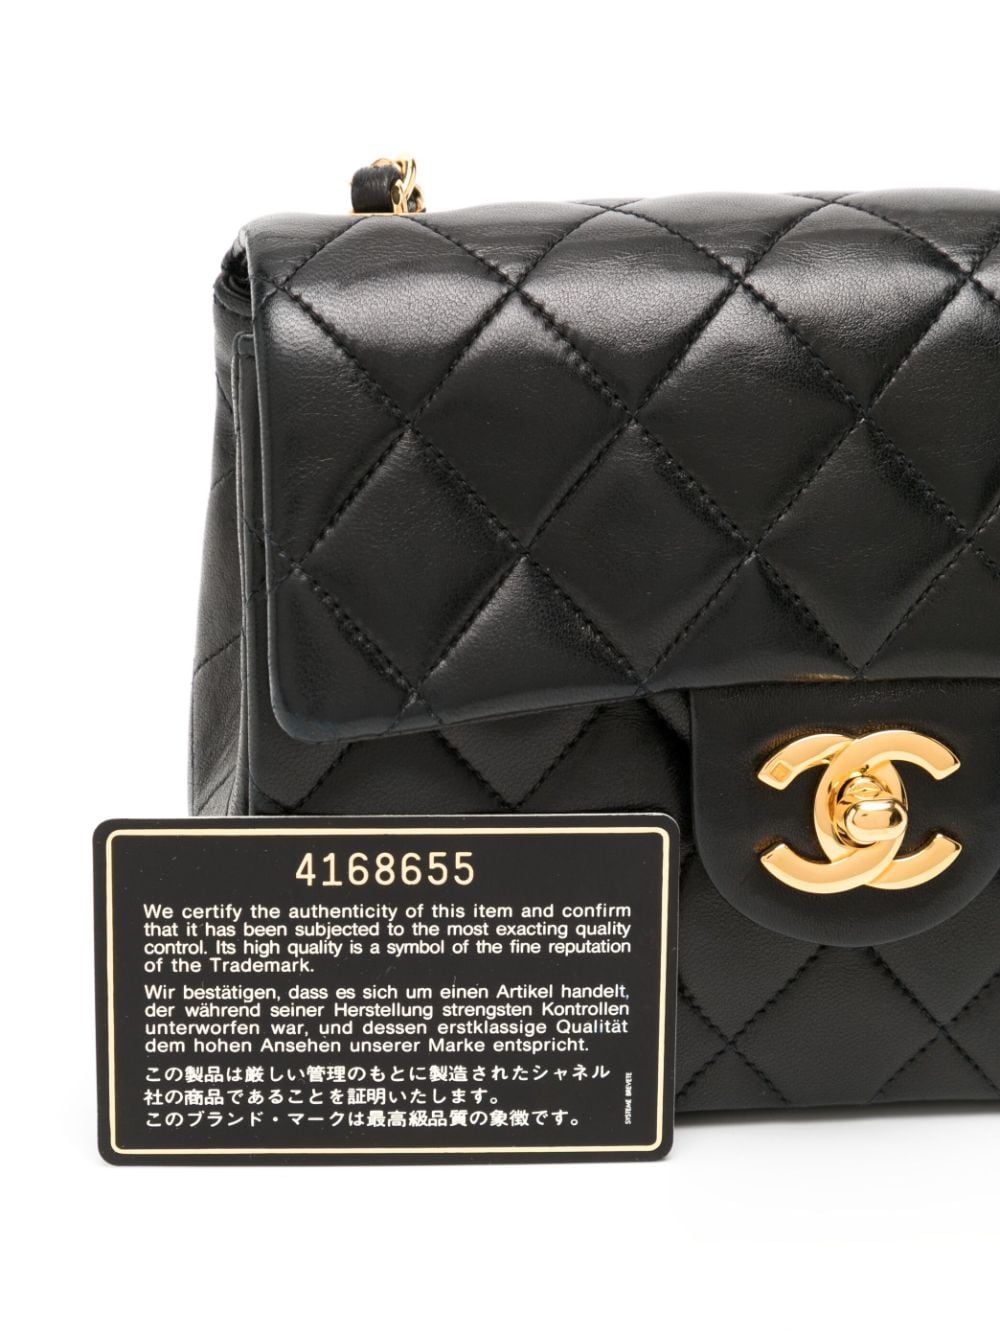 Chanel classic small square bag  Sucrich Officoal site  Redefining Luxury  Fashion